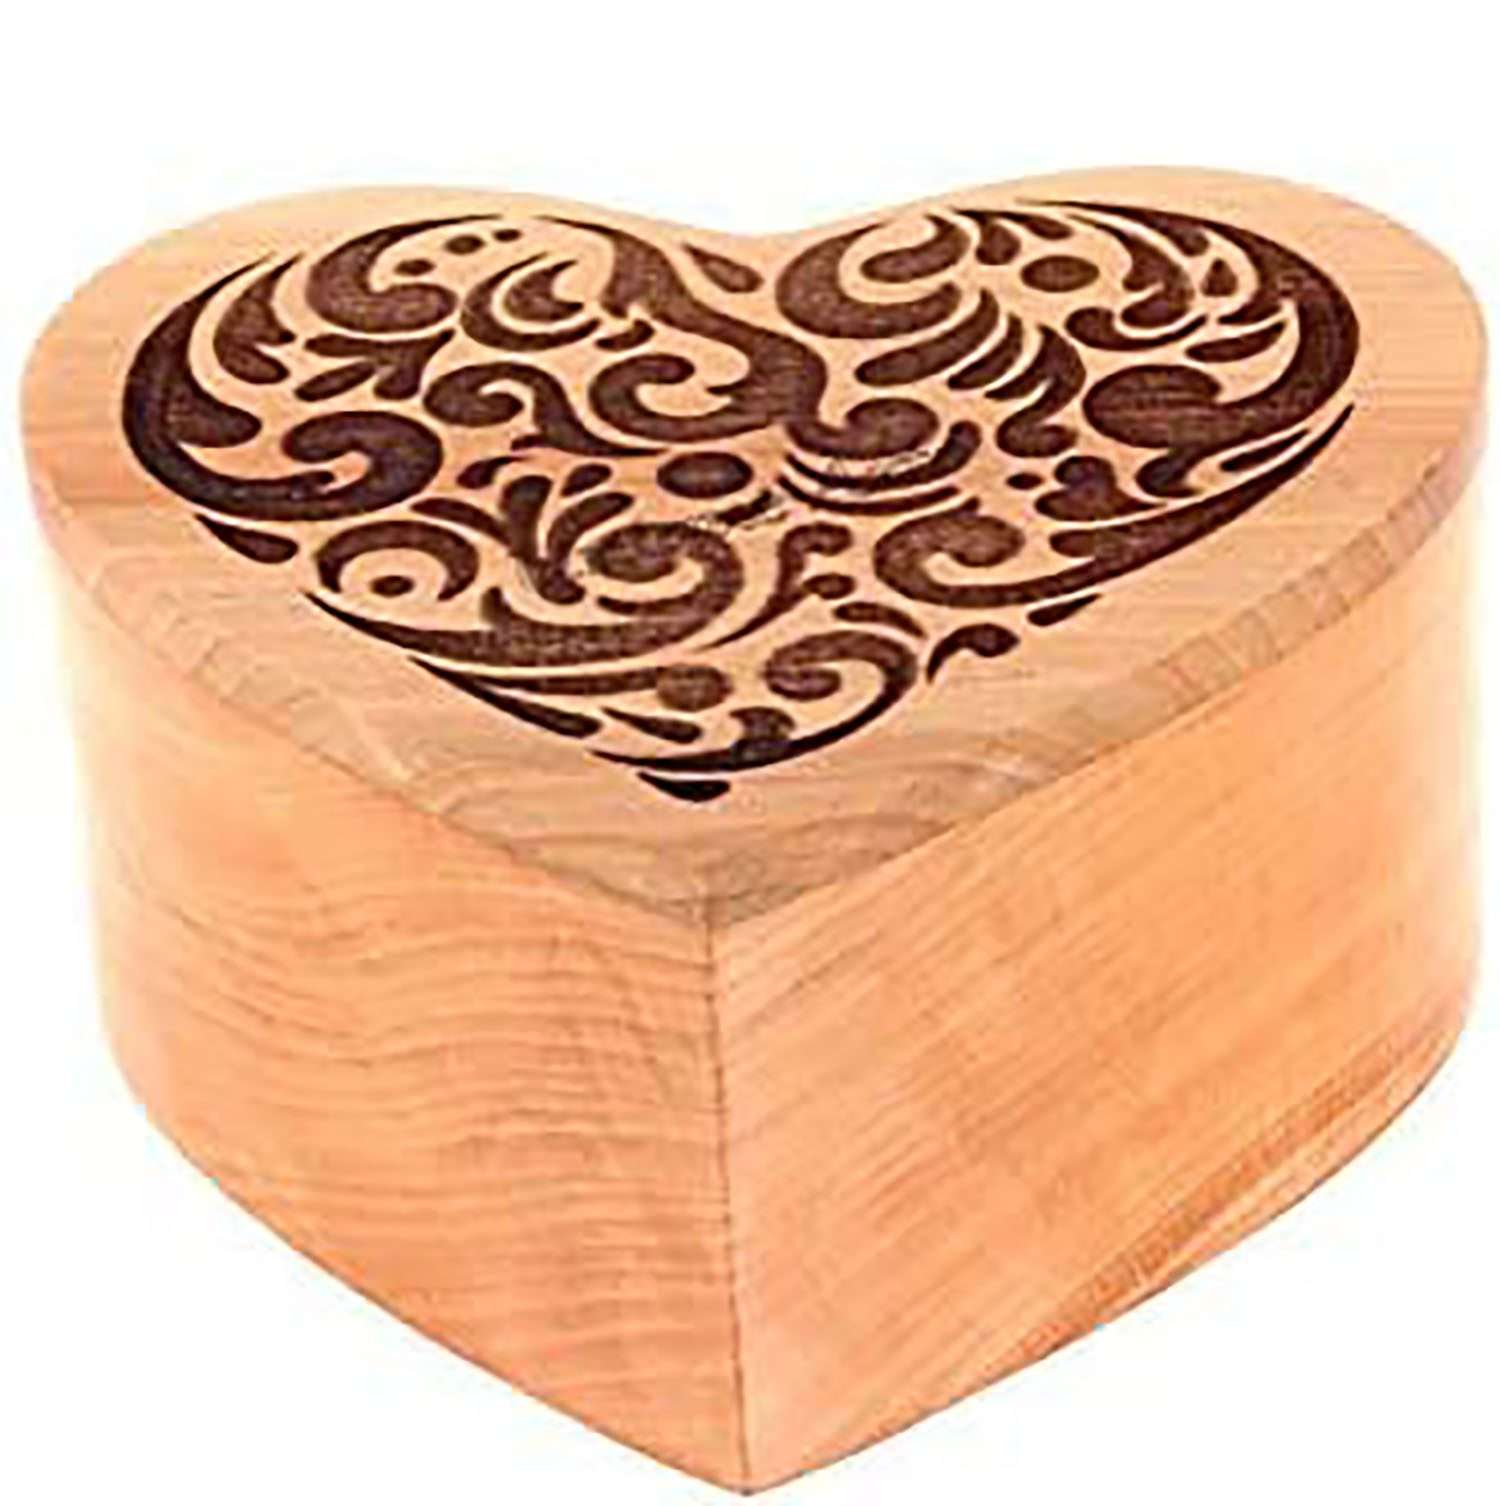 Unique Wood Heart Shaped Cremation Urn Box for Human Ashes Engraving | Handcrafted Wooden Box for urn | Wood Urn Box manufacturer & supplier